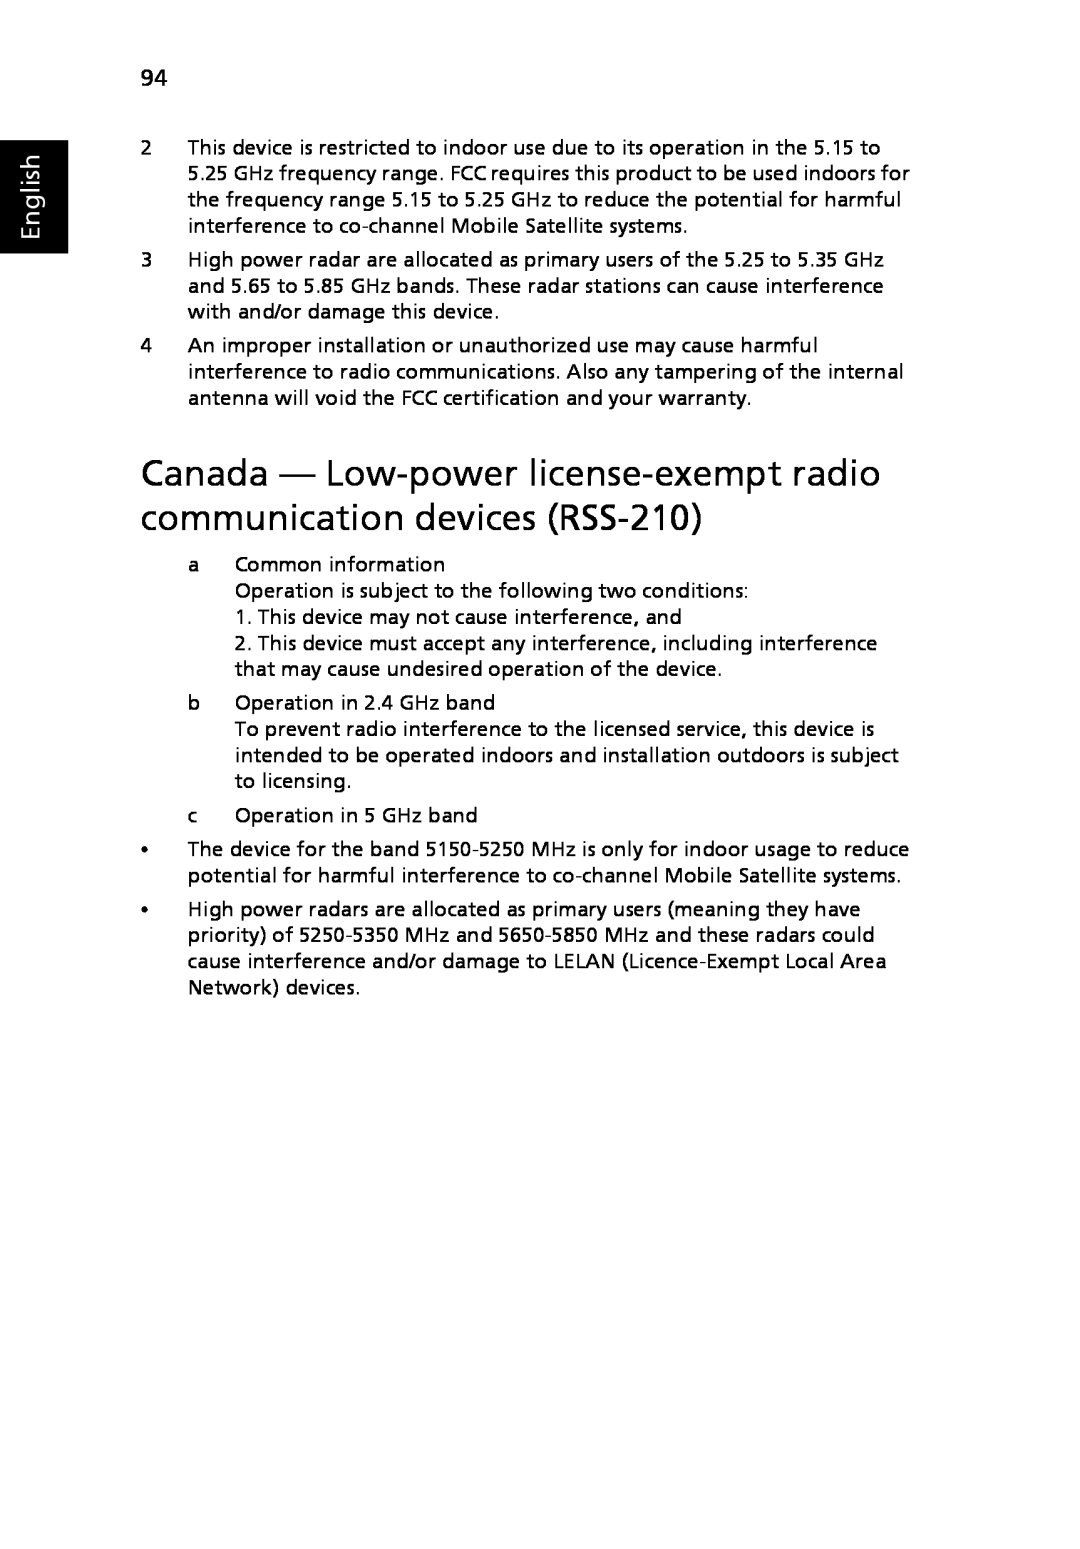 Acer 5520G, 5220 manual Canada - Low-power license-exempt radio communication devices RSS-210, English 